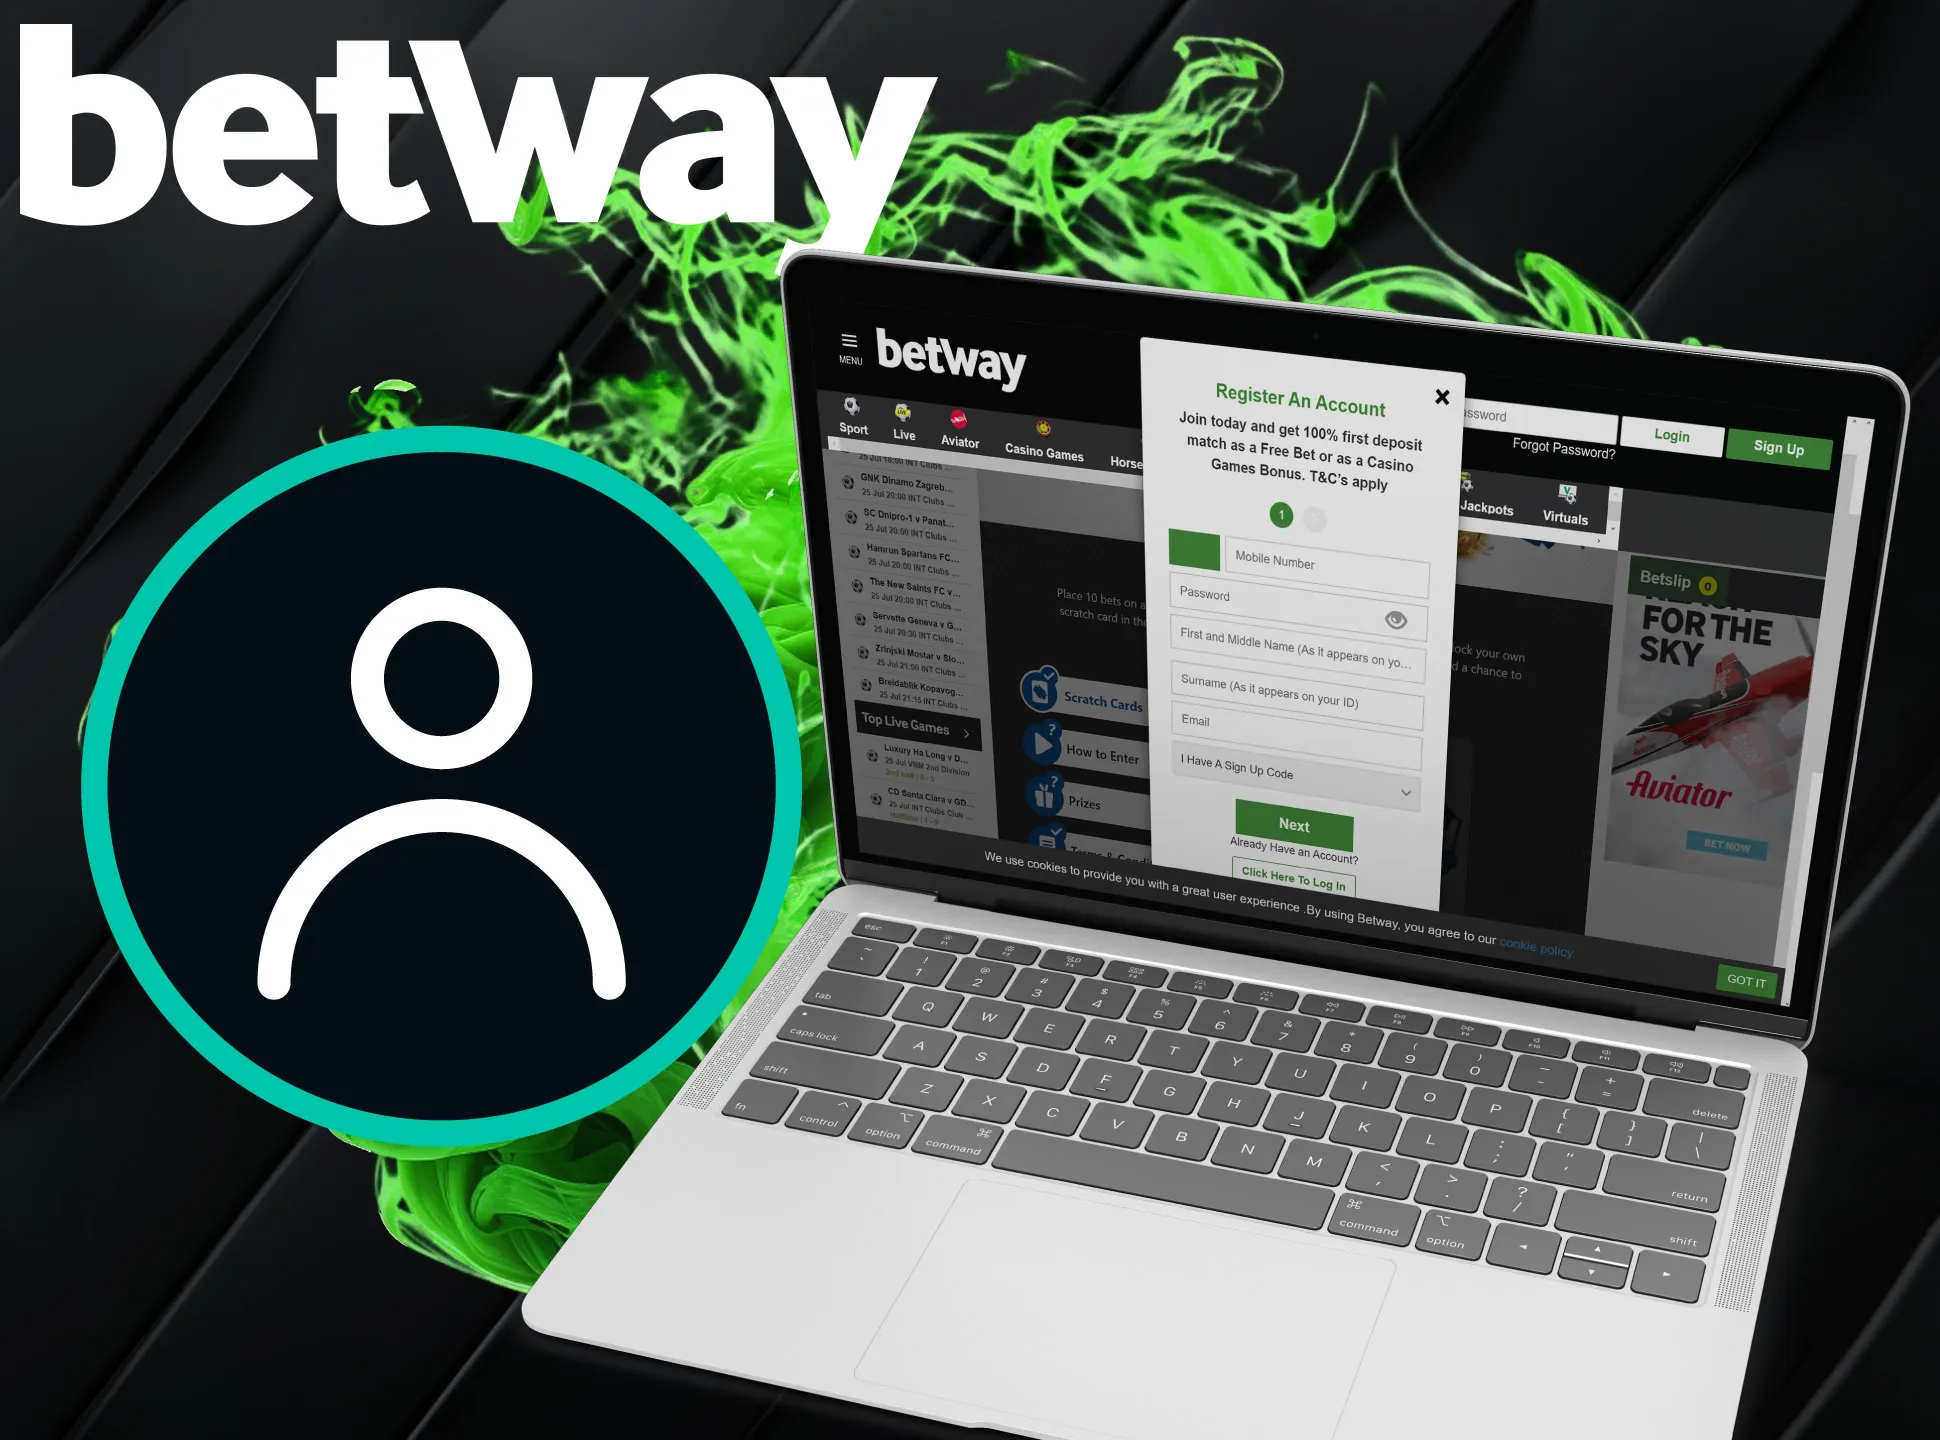 Follow these steps to register at Betway.